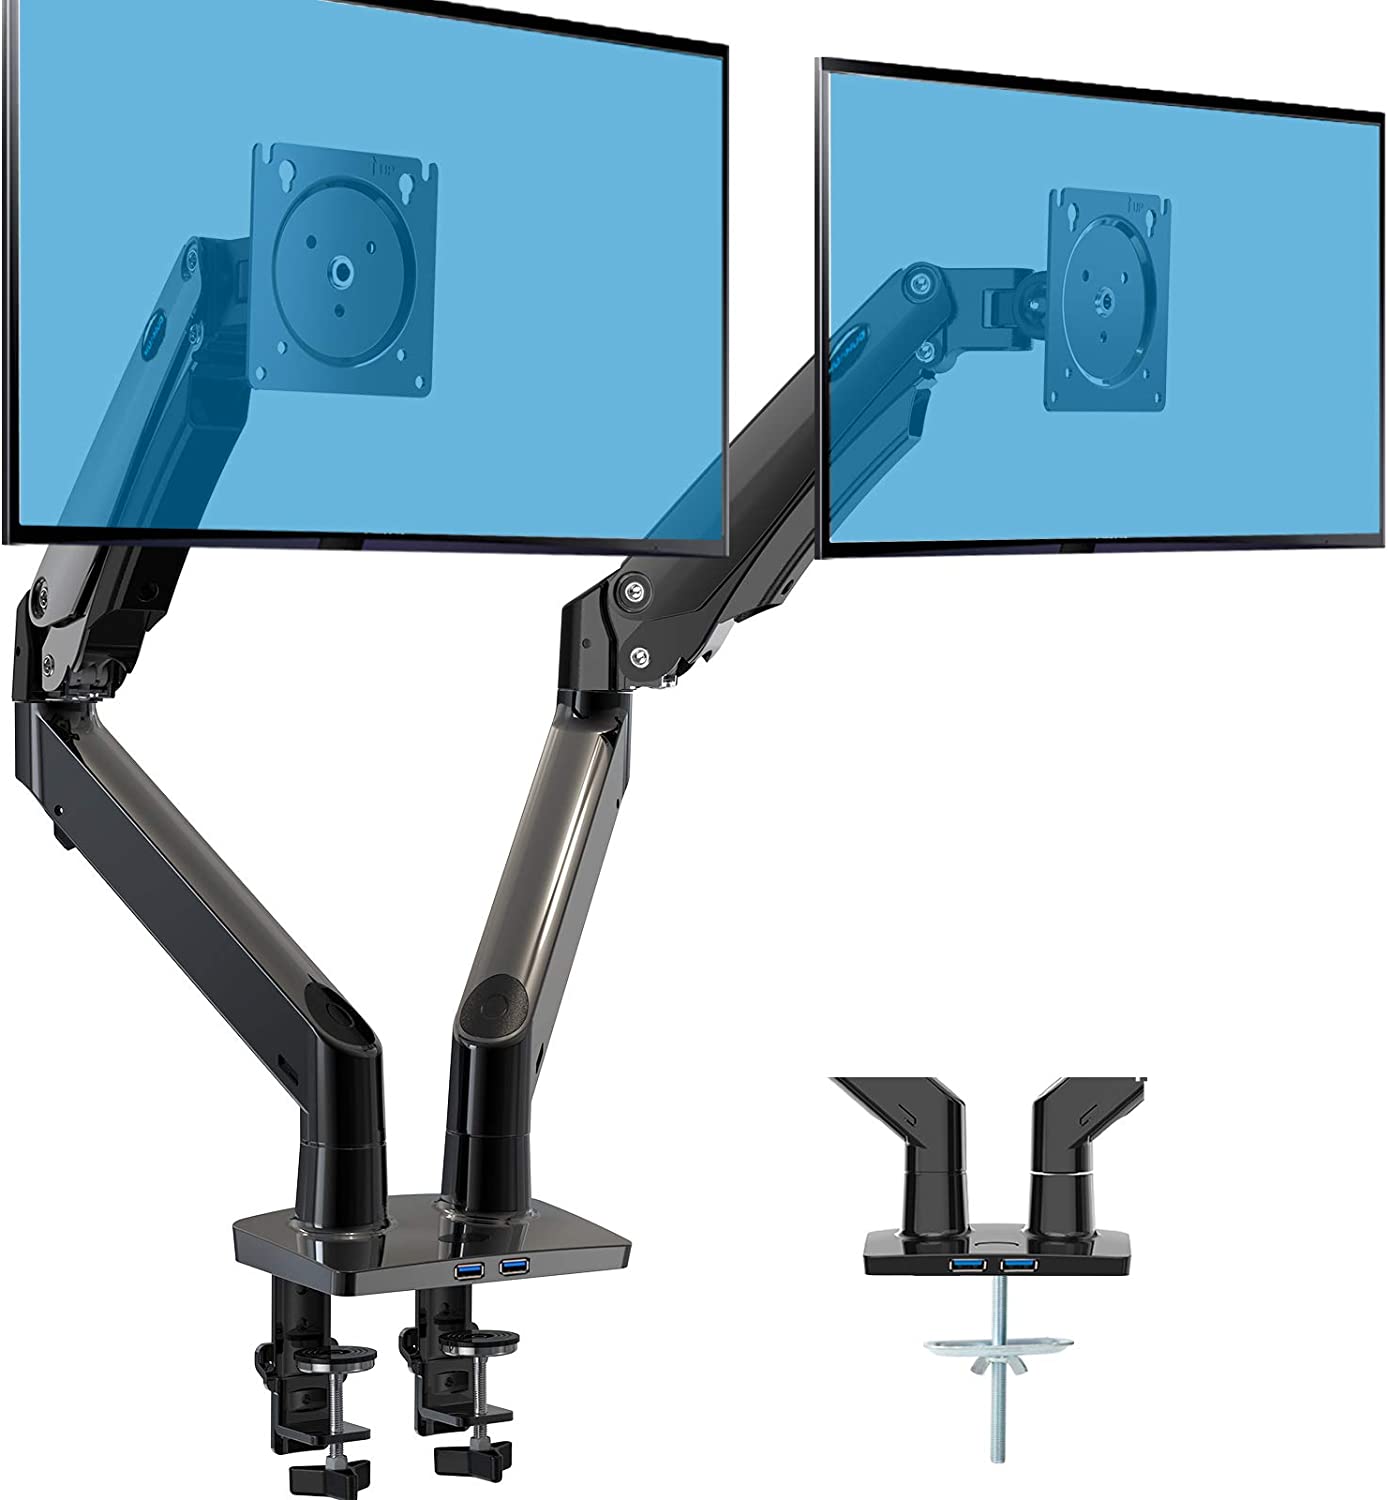 basics Dual Monitor Stand - Height-Adjustable Arm Mount, Steel - Buy   basics Dual Monitor Stand - Height-Adjustable Arm Mount, Steel Online at  Low Price in India 